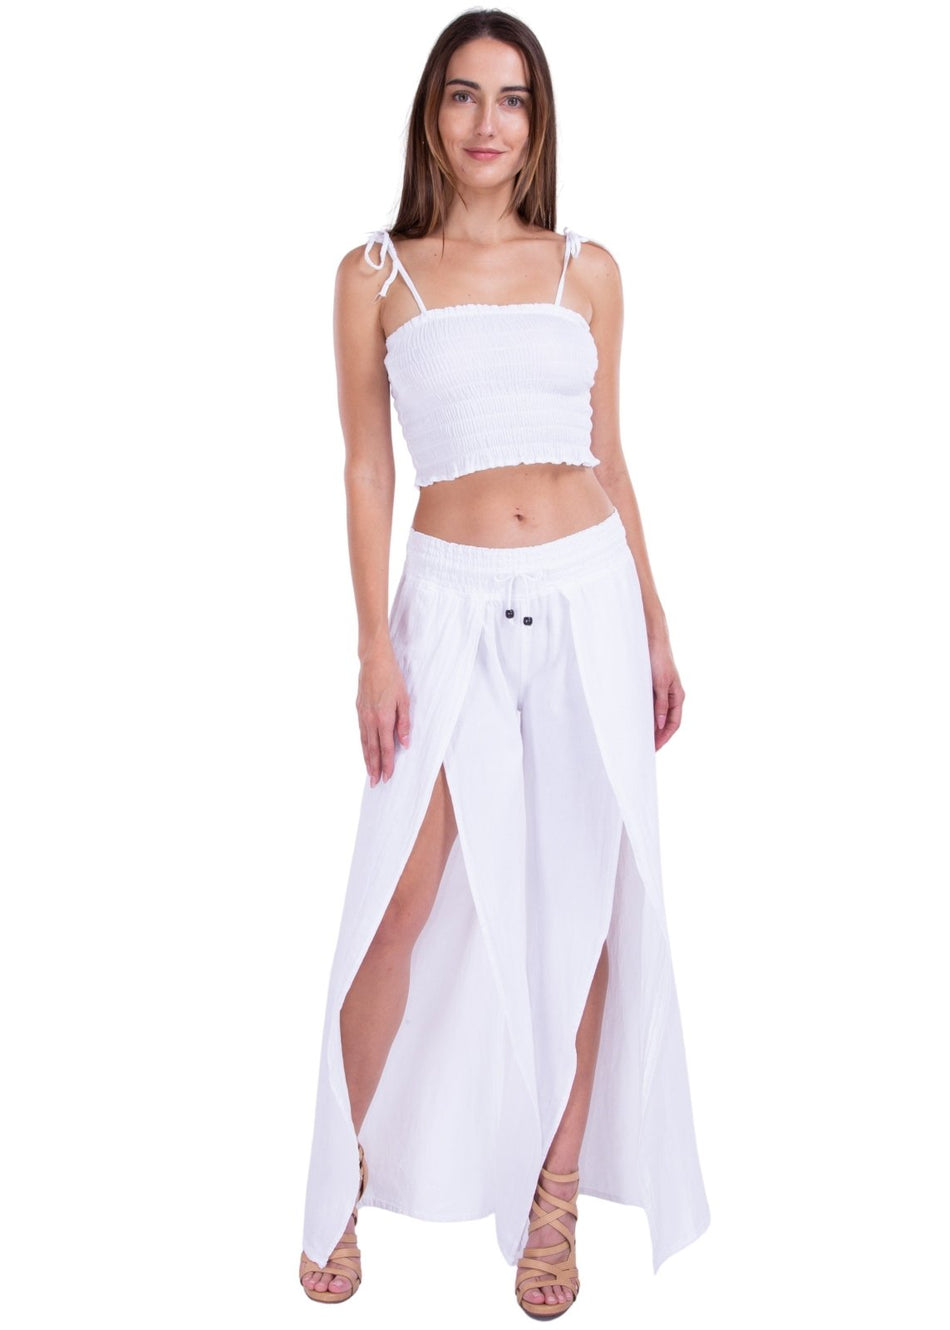 Shirred Tie Front Strapless Top in White